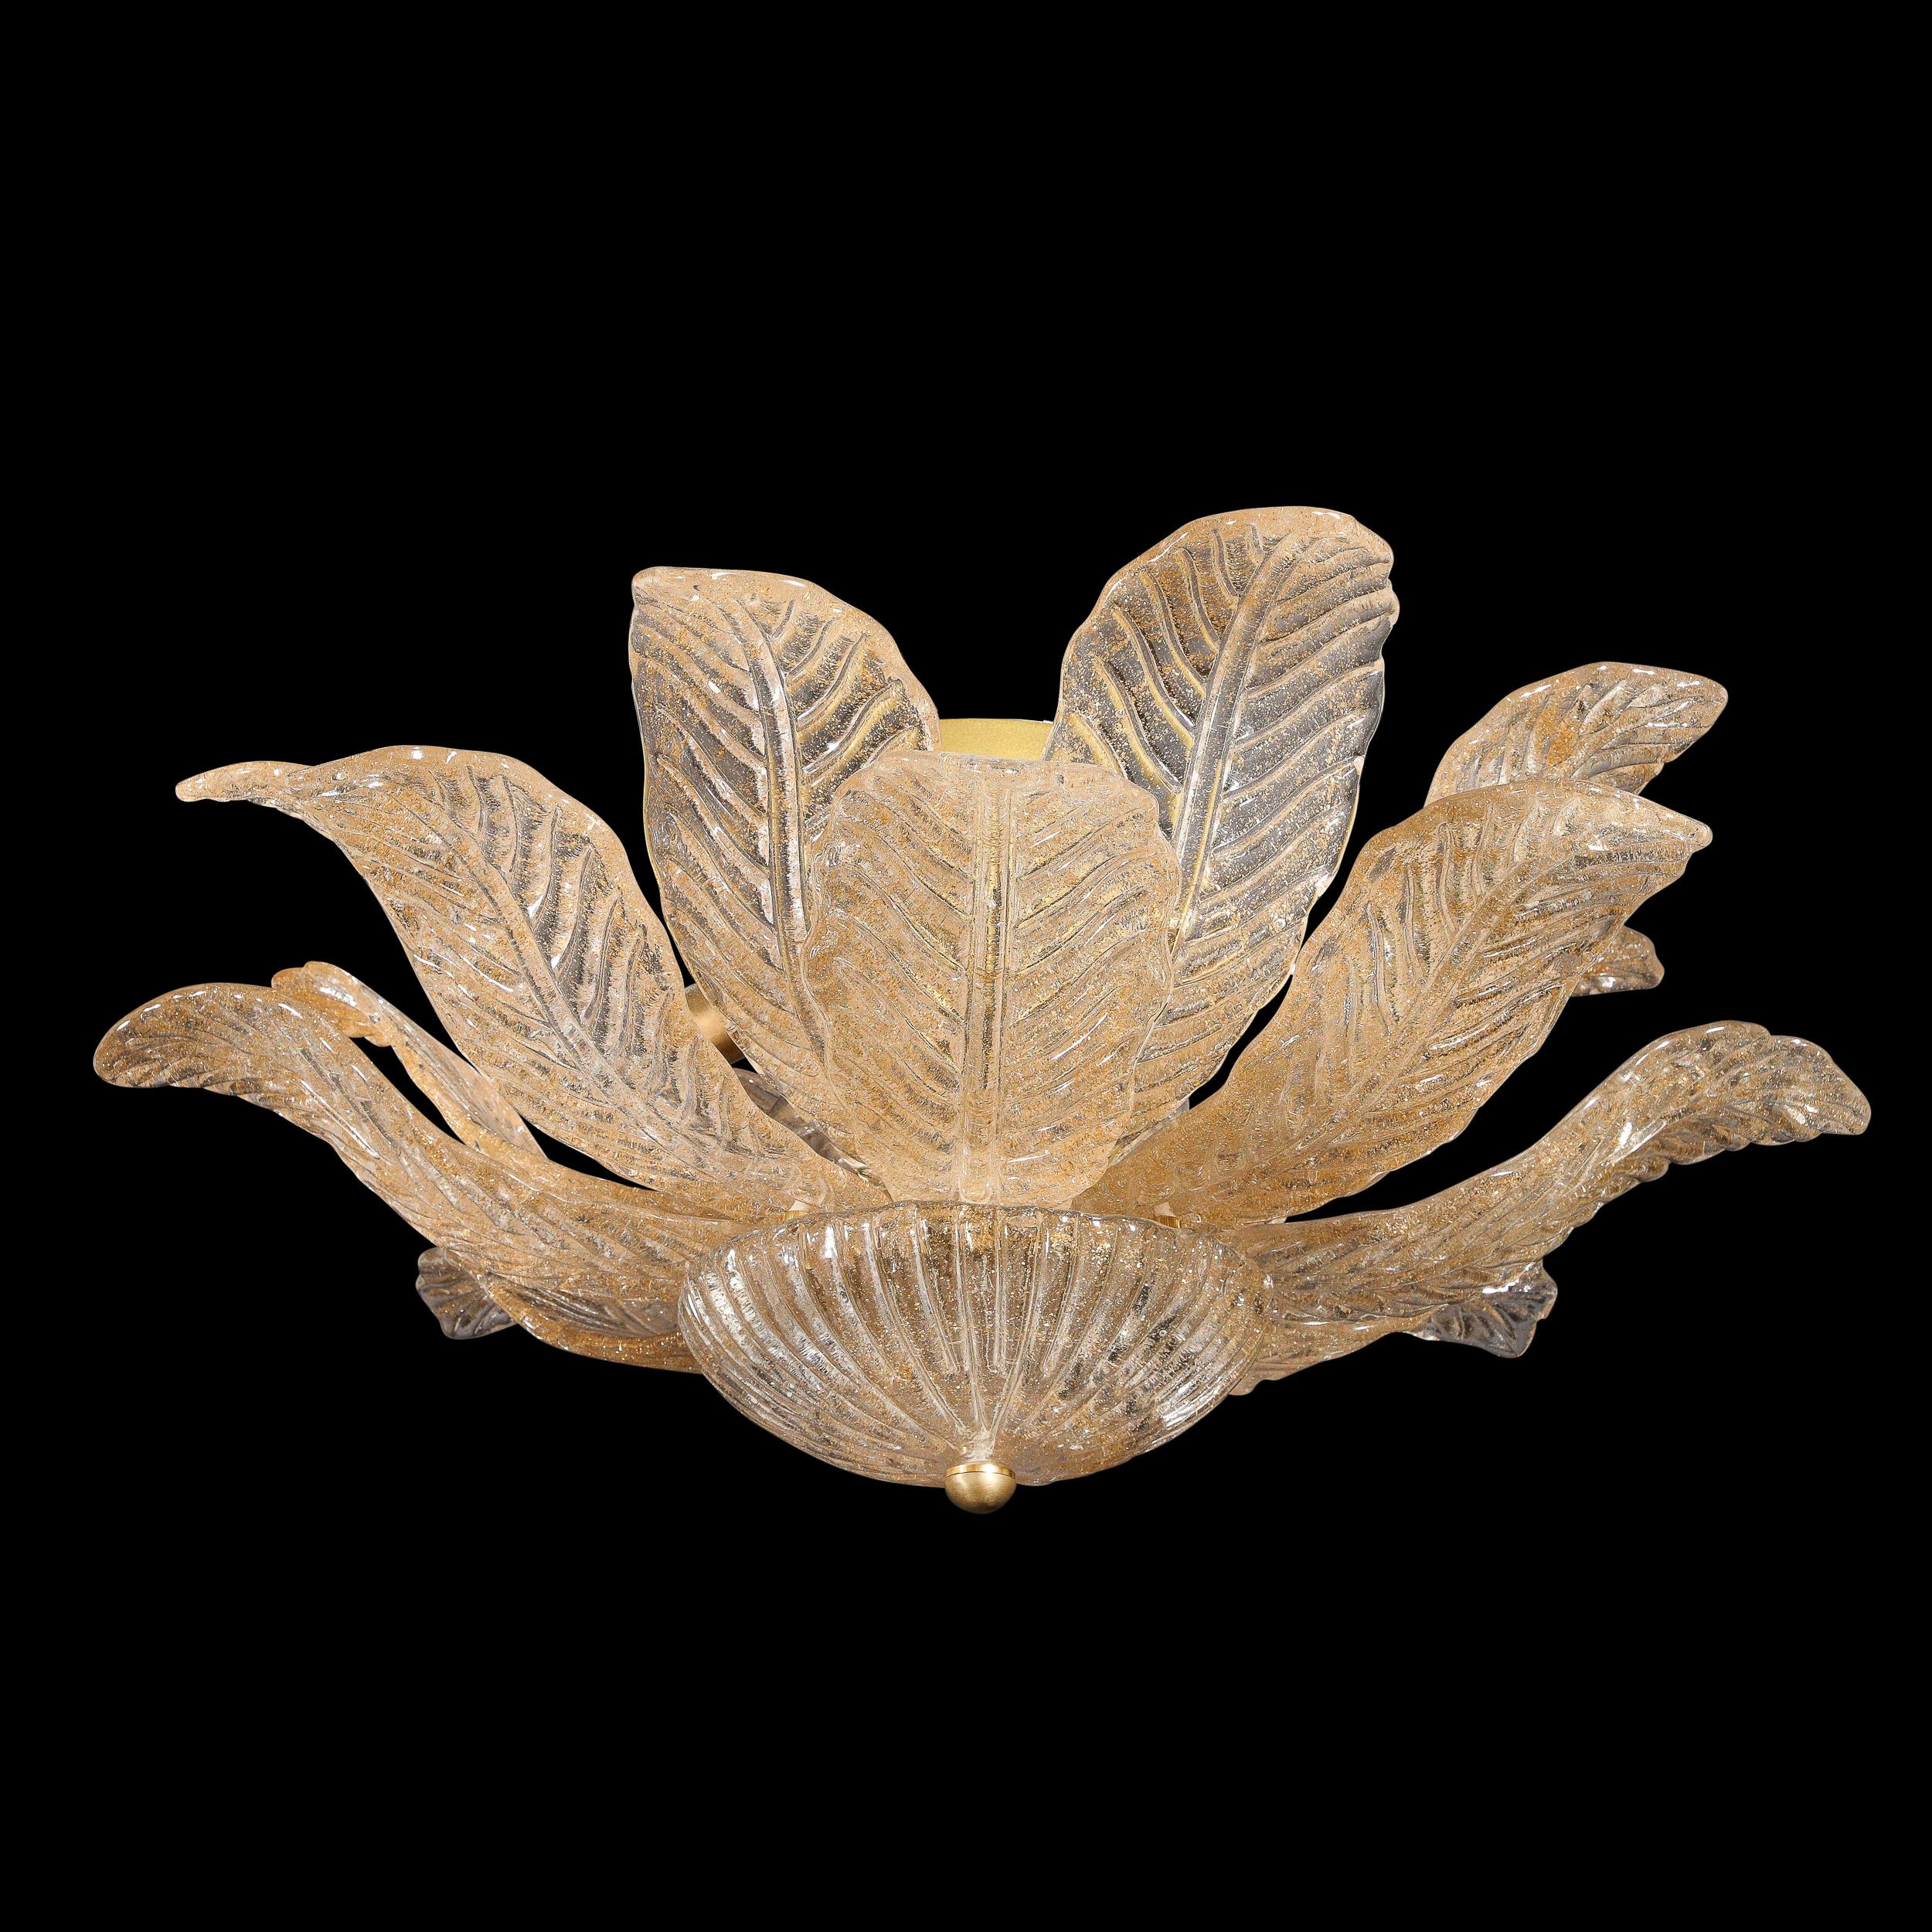 This elegant modernist leaf form flush mount chandelier was realized in Murano, Italy- the island off the coast of Venice renowned for centuries for its superlative glass production- during the 21st century. It features a profusion of stylized